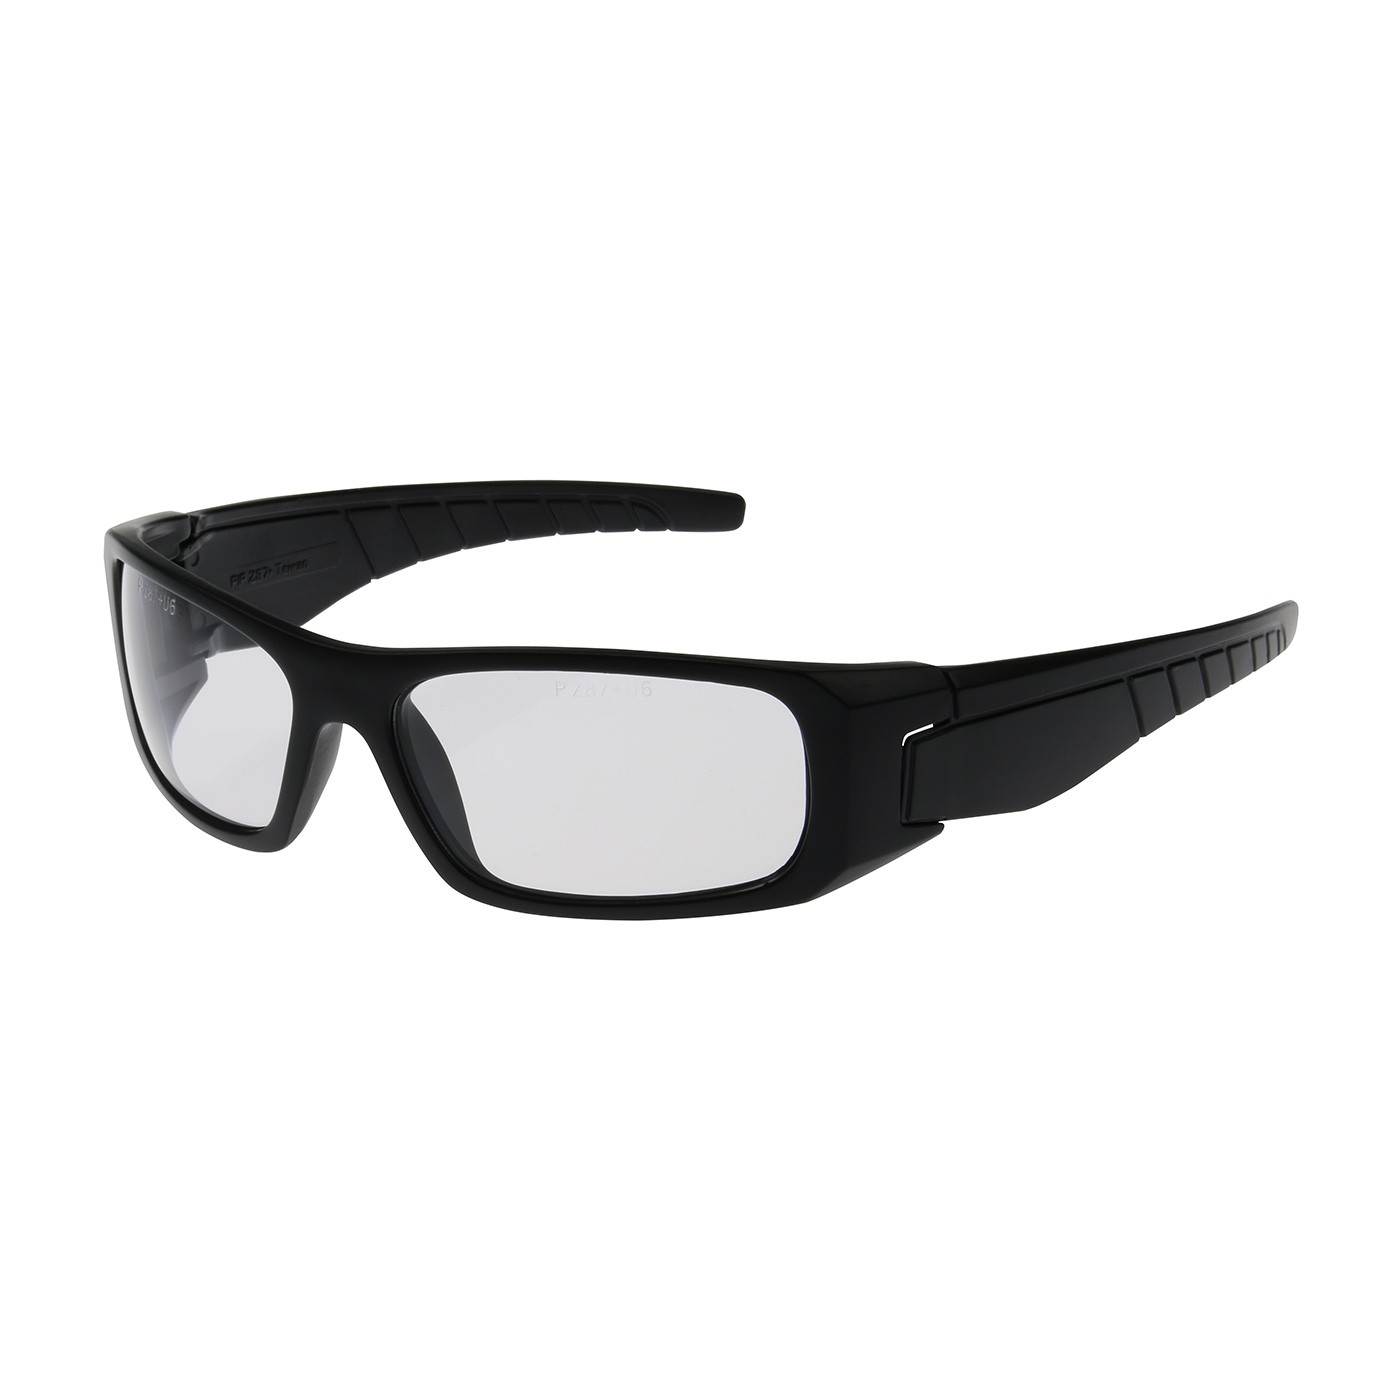 Squadron™ Full Frame Safety Glasses with Black Frame, Clear Lens and Anti-Scratch / Anti-Fog Coating  (#250-53-0020)